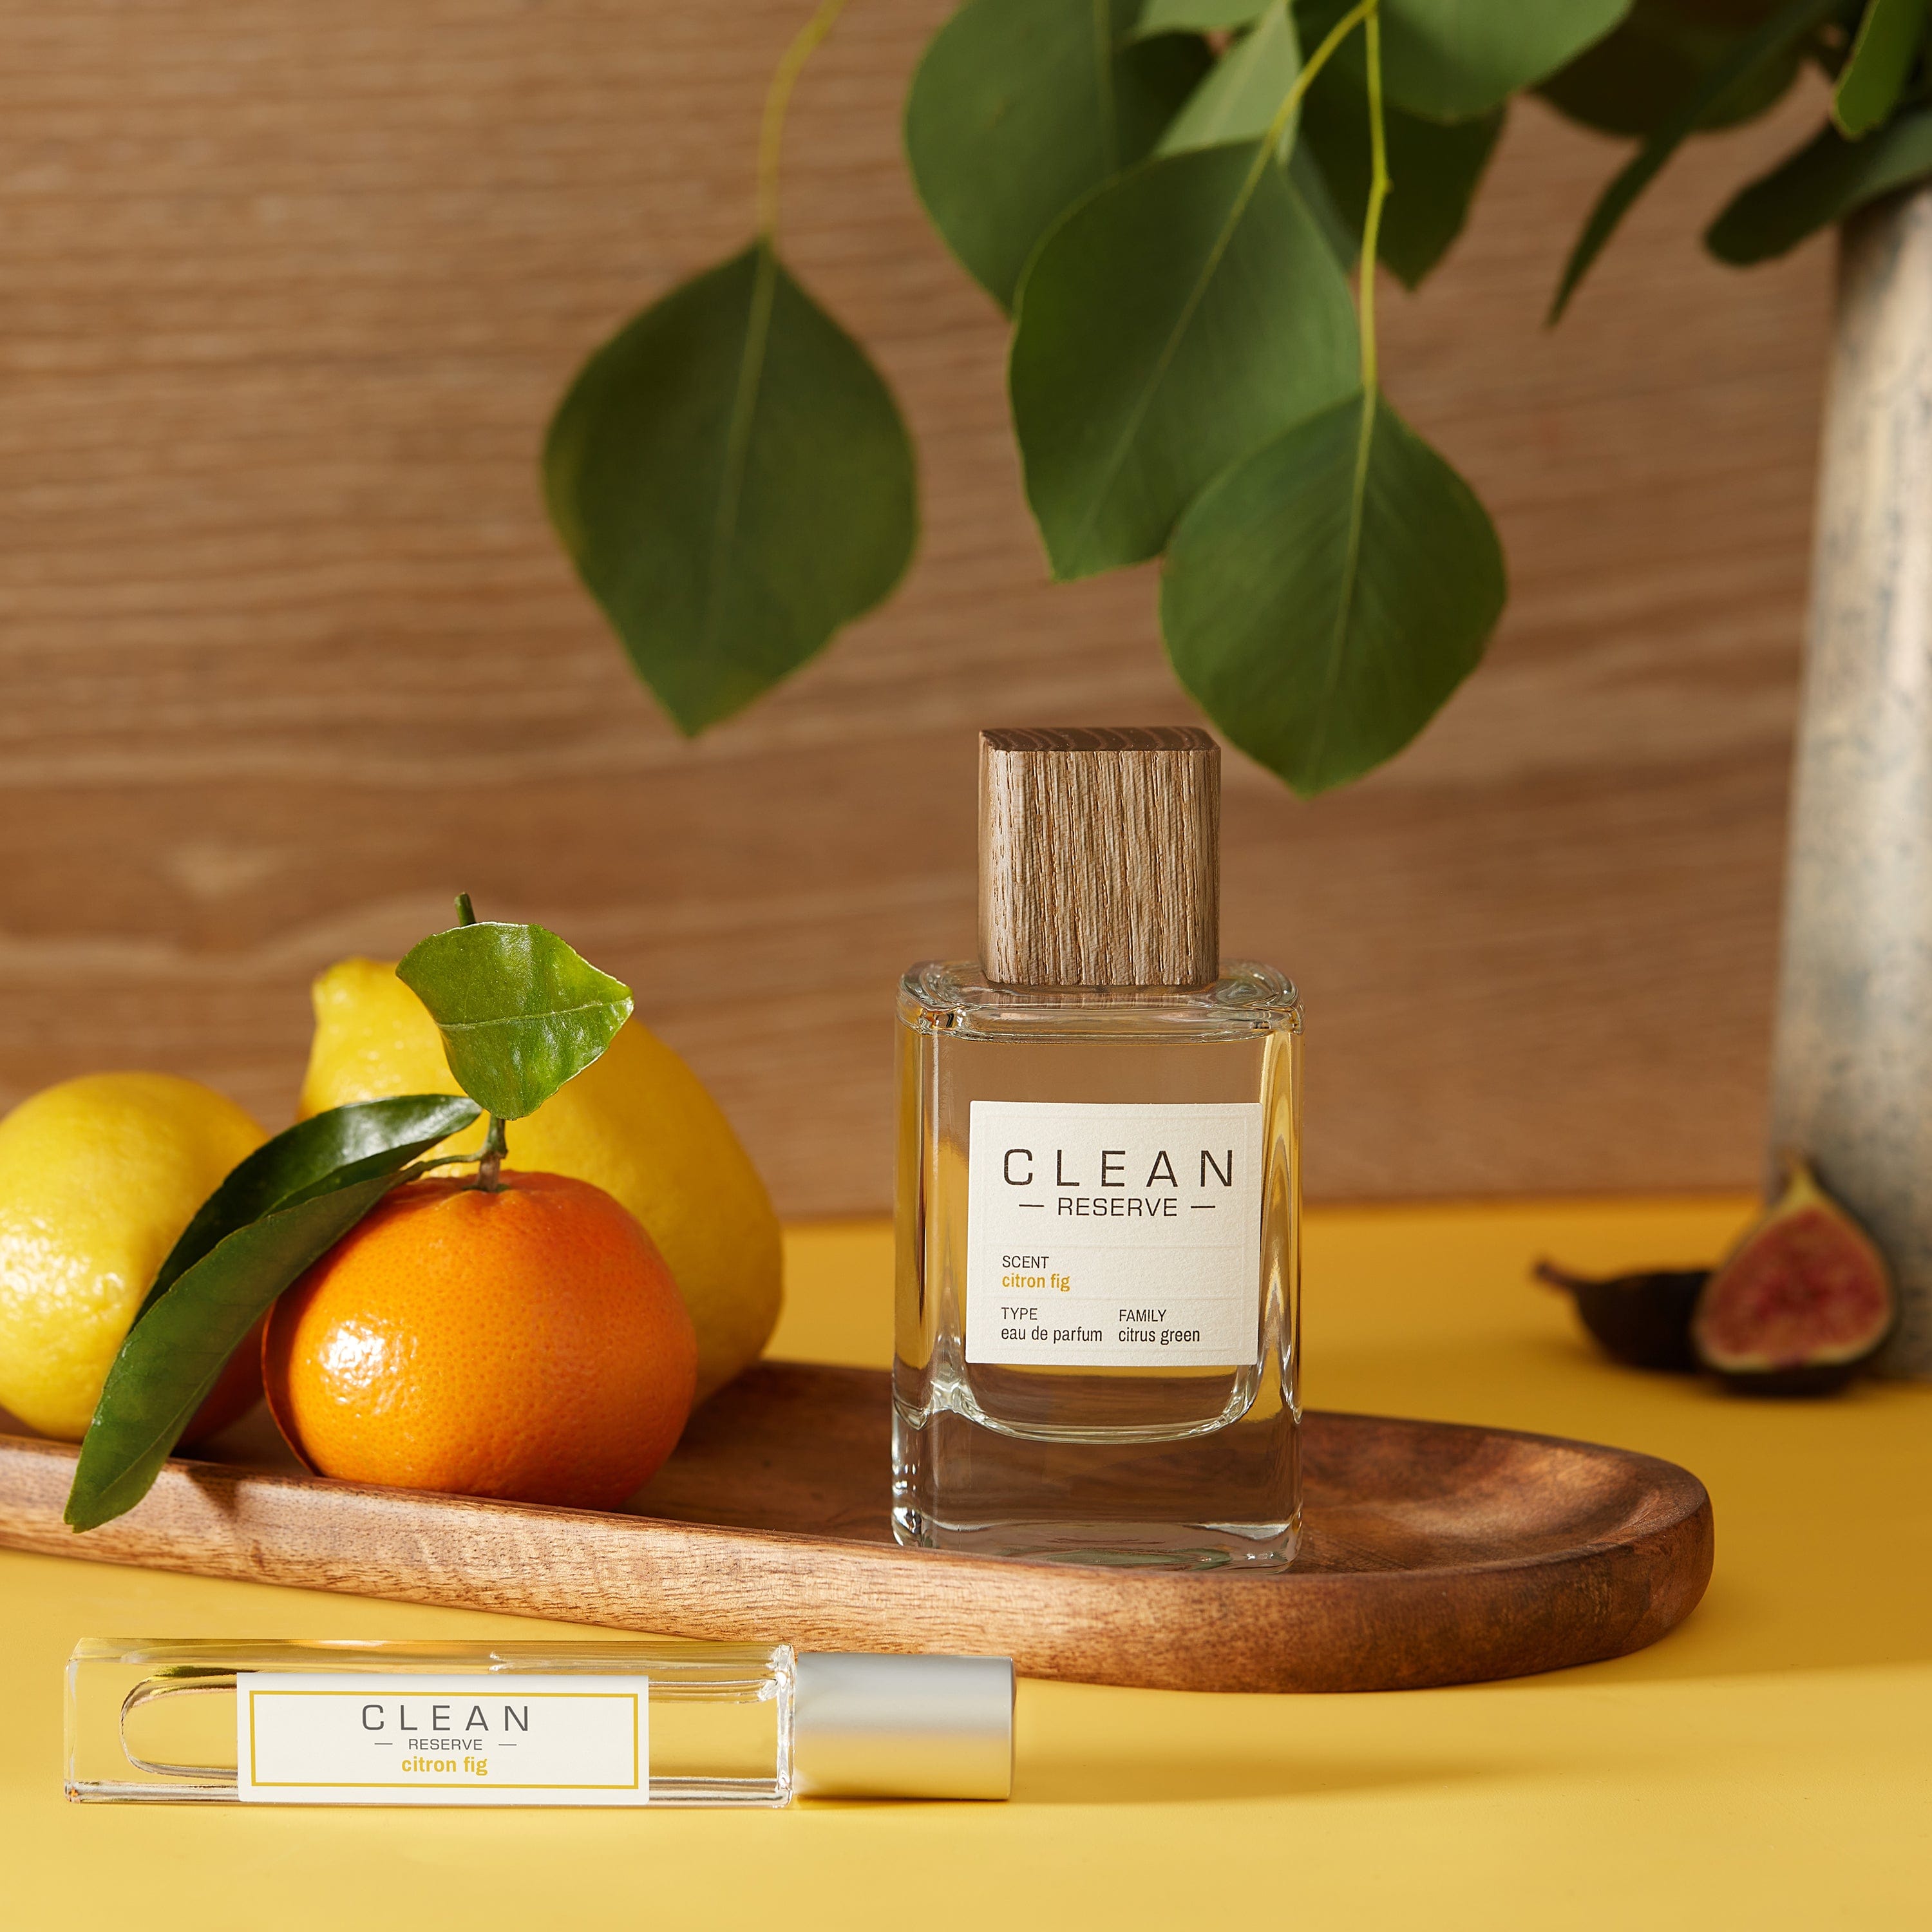 CLEAN RESERVE Citron Fig Fragrance – Three Sizes – CLEAN Beauty